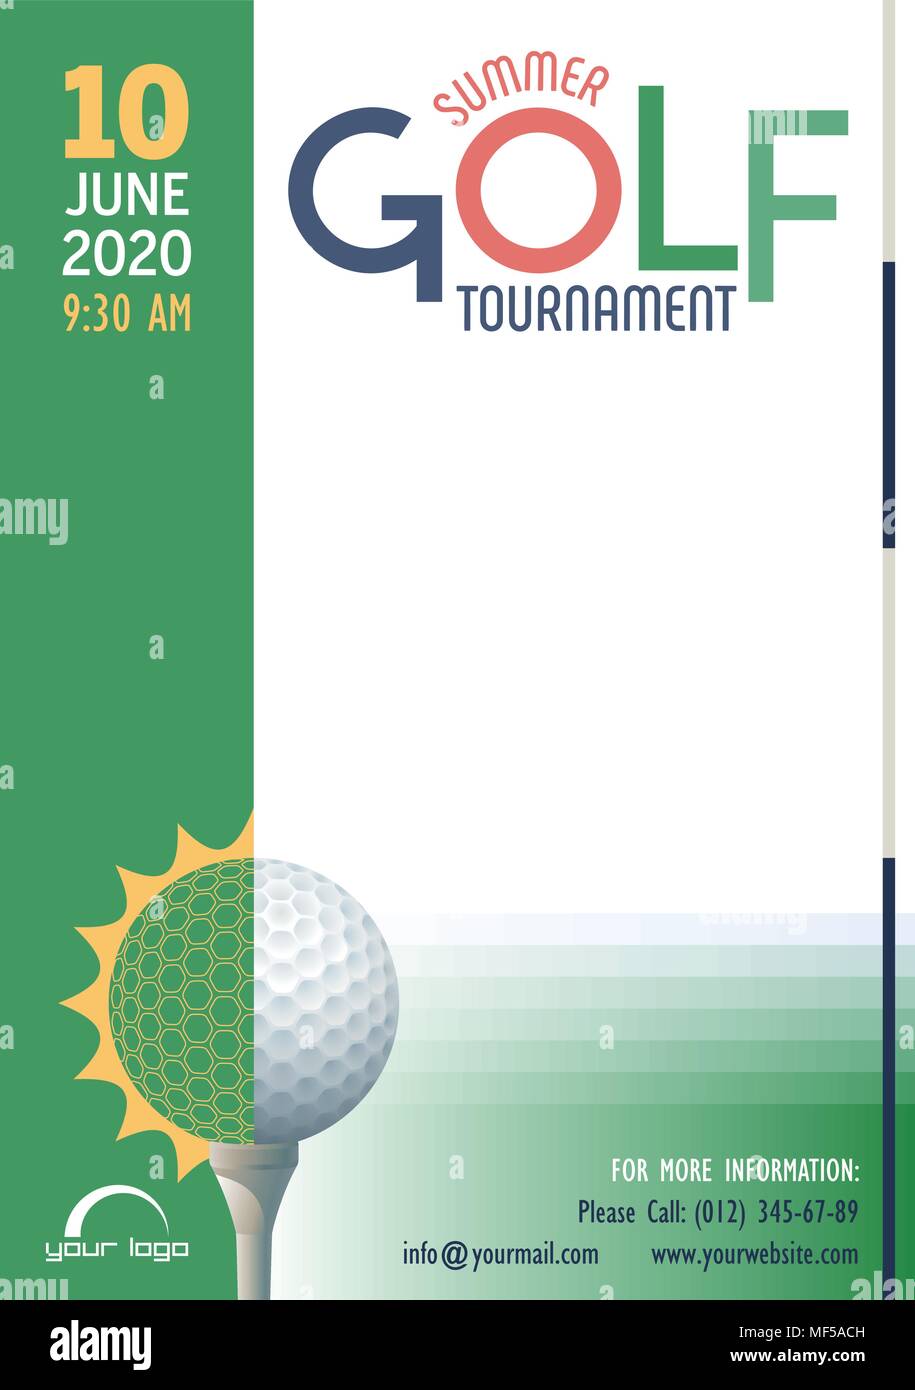 Charity Golf Tournament Flyer Poster Template